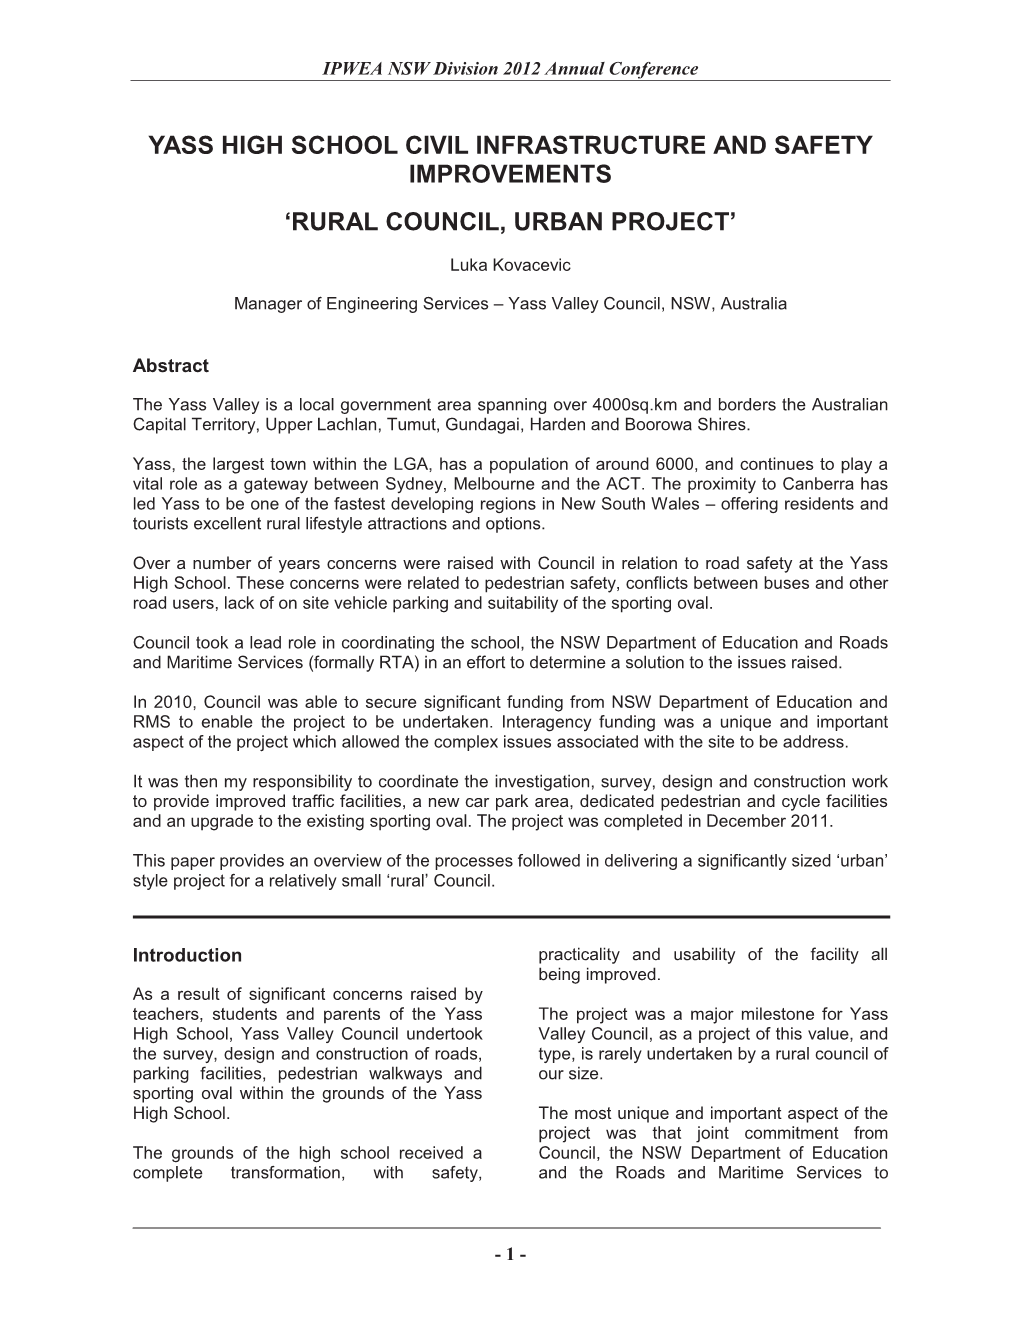 Yass High School Civil Infrastructure and Safety Improvements ‘Rural Council, Urban Project’